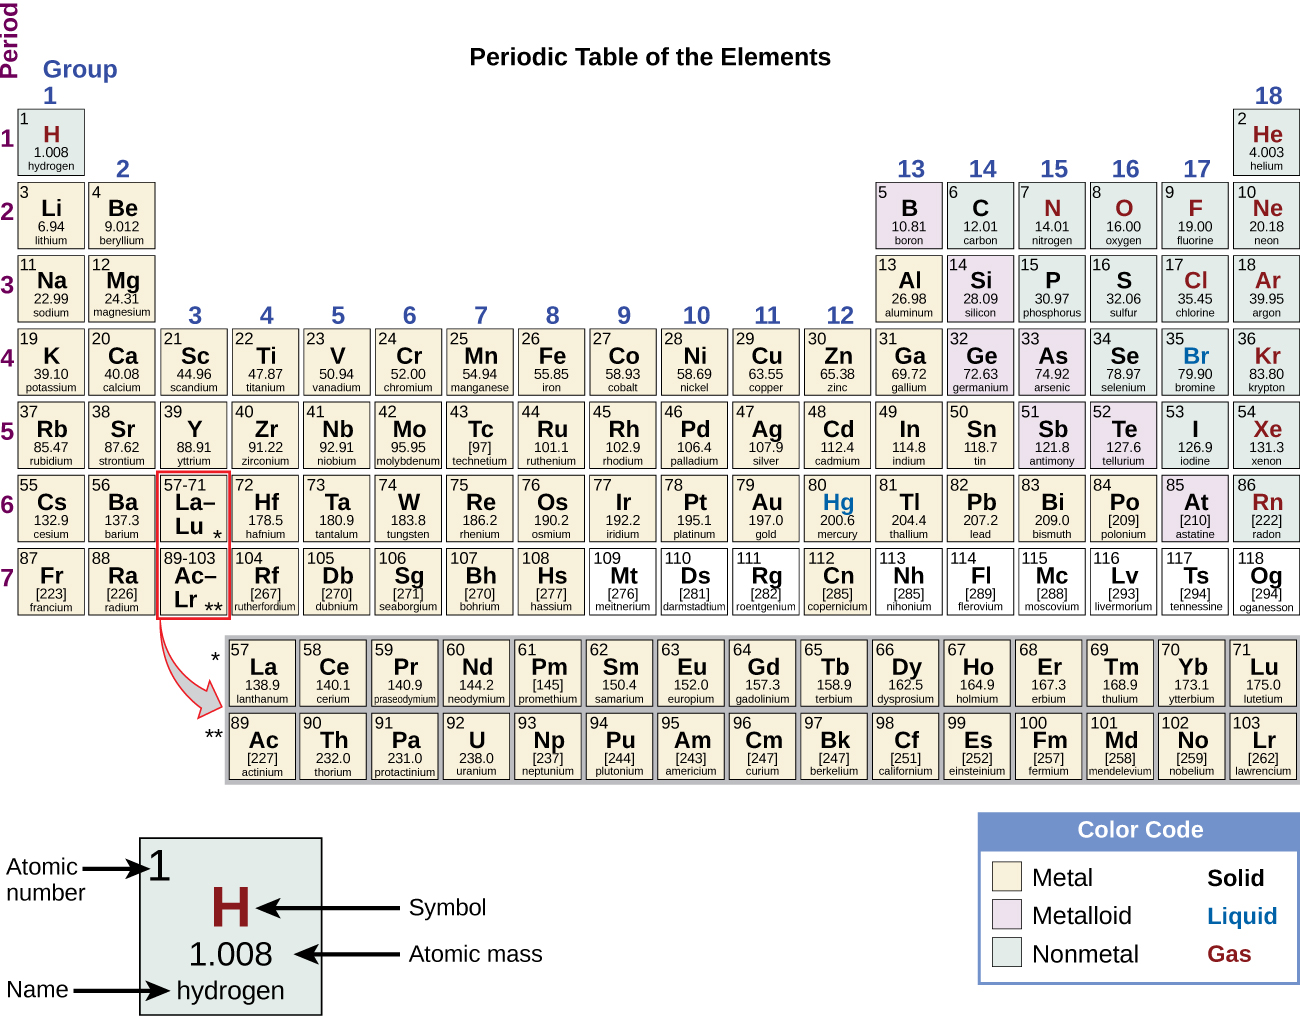 Periodic table of elements.